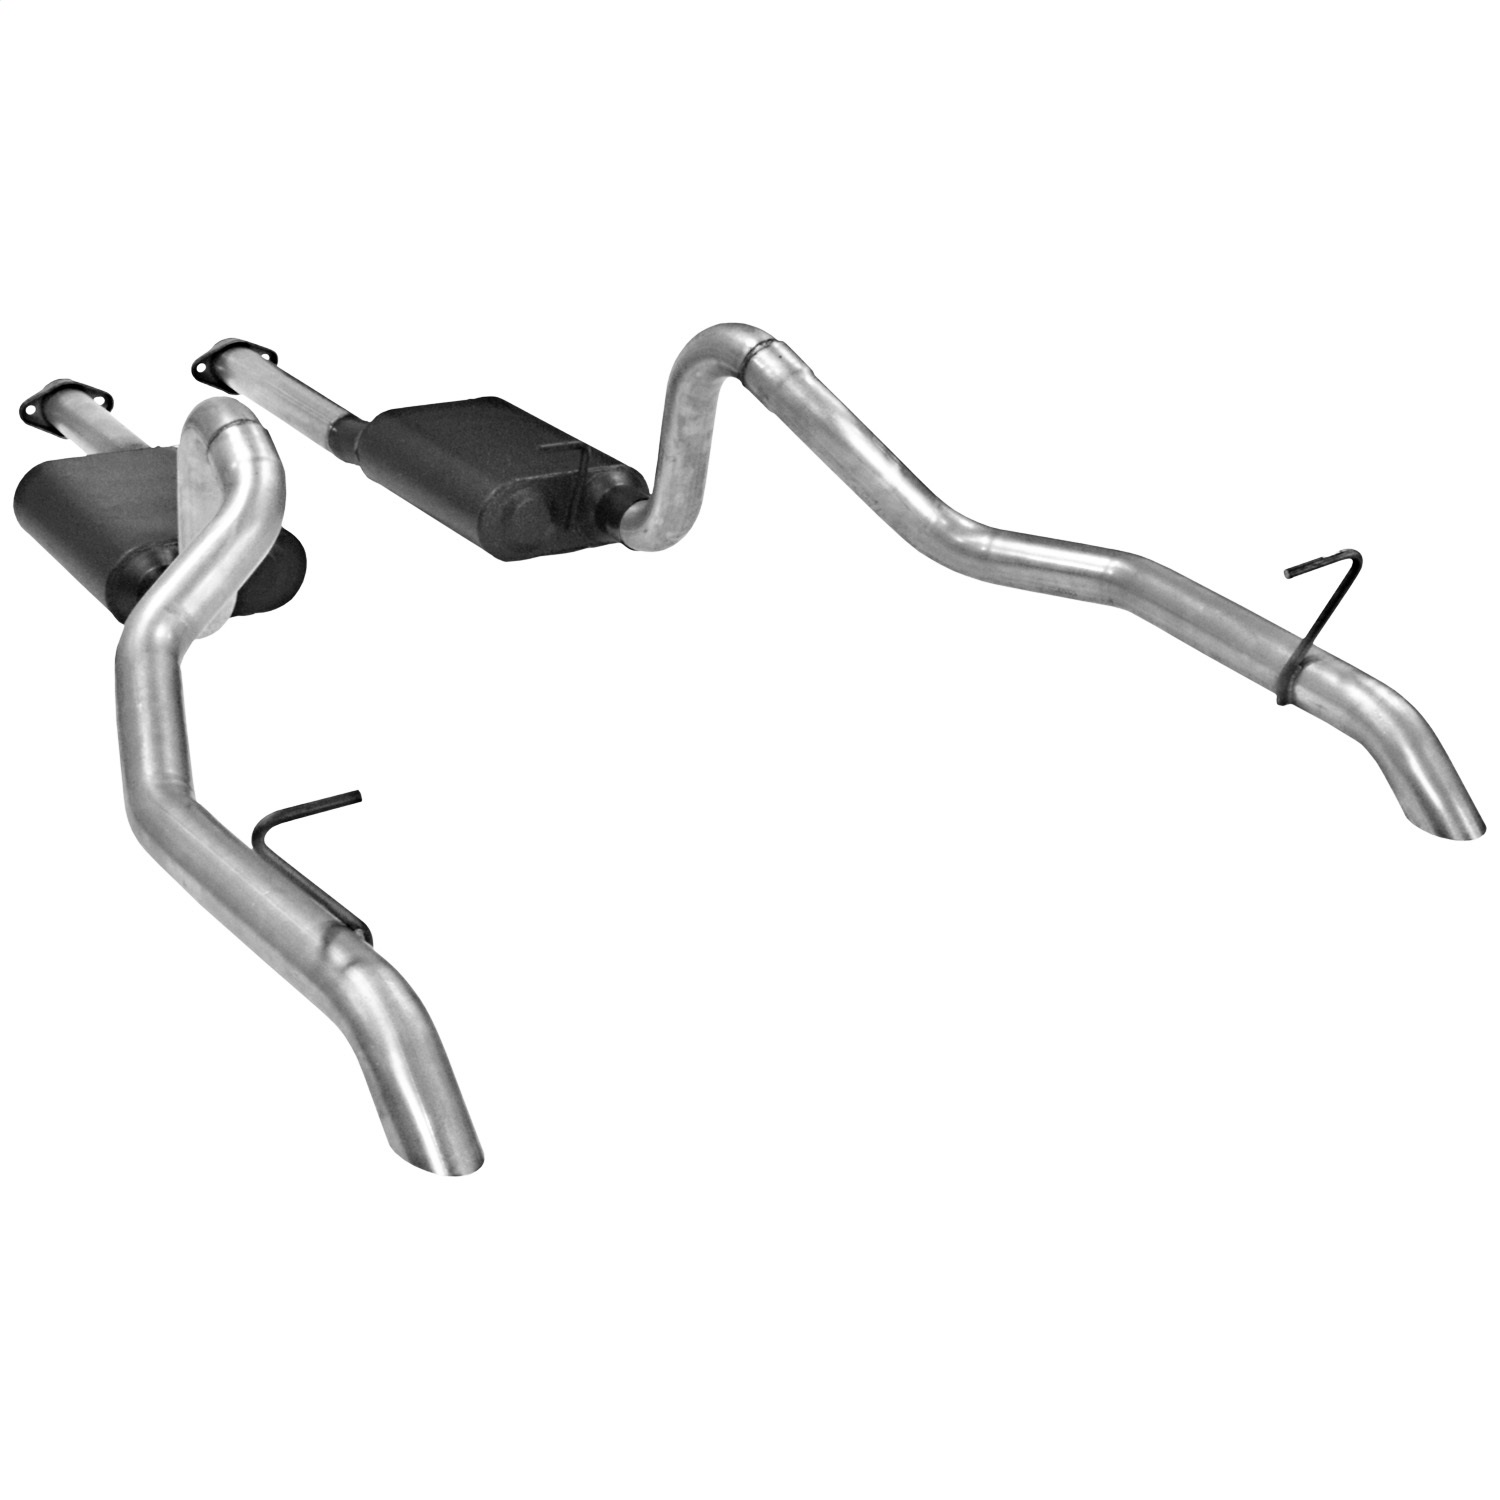 Flowmaster Flowmaster 17116 American Thunder Cat Back Exhaust System Fits 87-93 Mustang